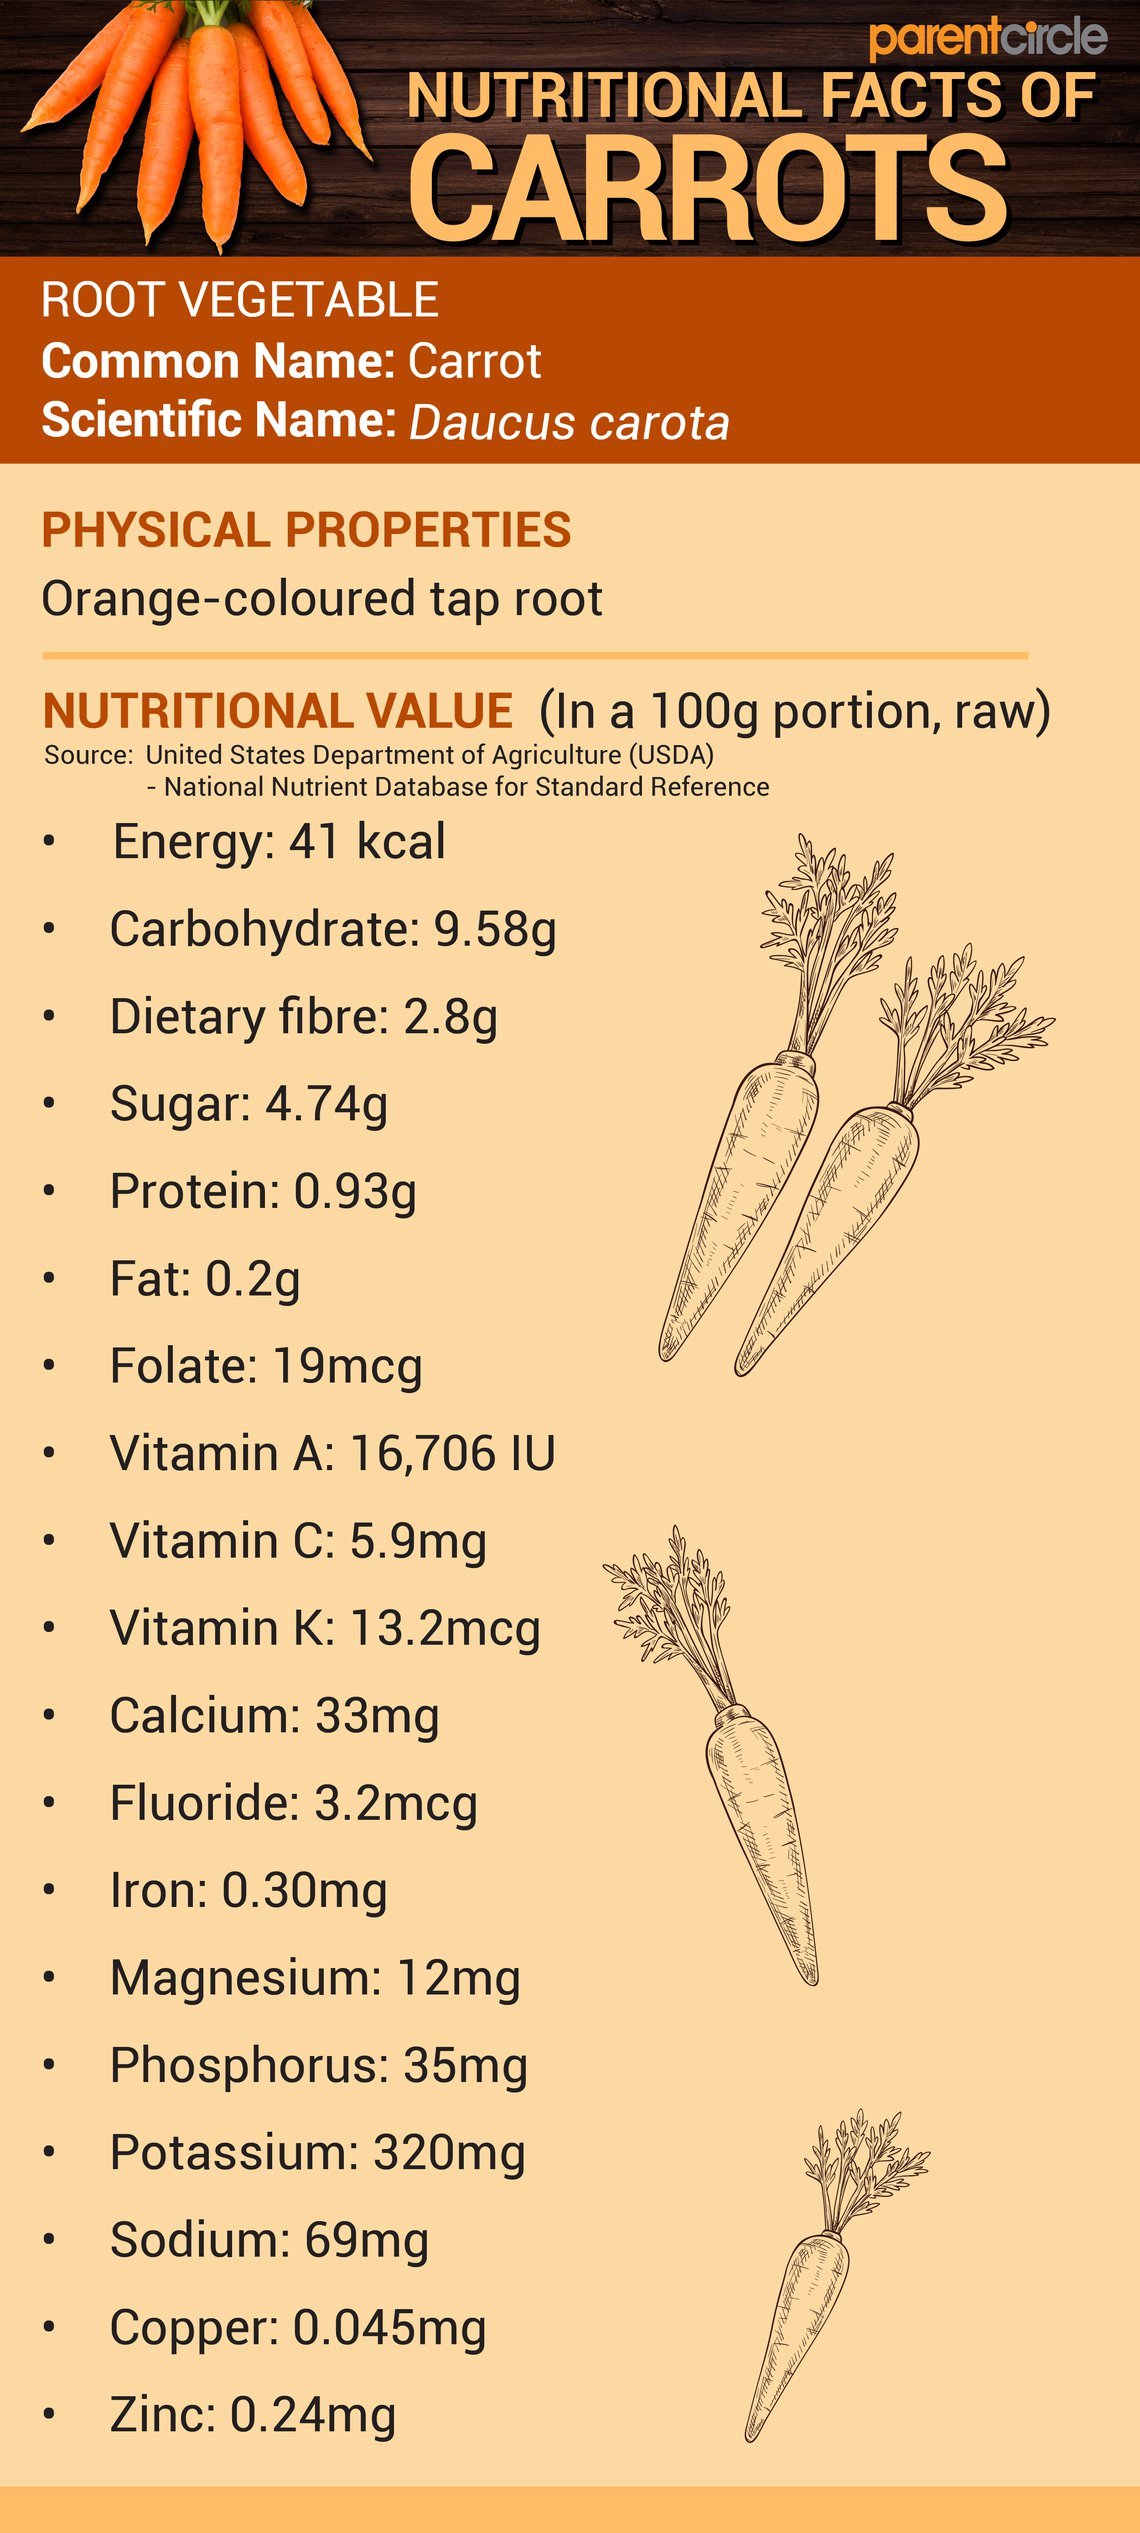 Carrot Nutritional Value per 100g, Carrot Nutrition Facts & Health Benefits,  Carrot Vitamins, Minerals & Calories, Uses of Carrots | ParentCircle